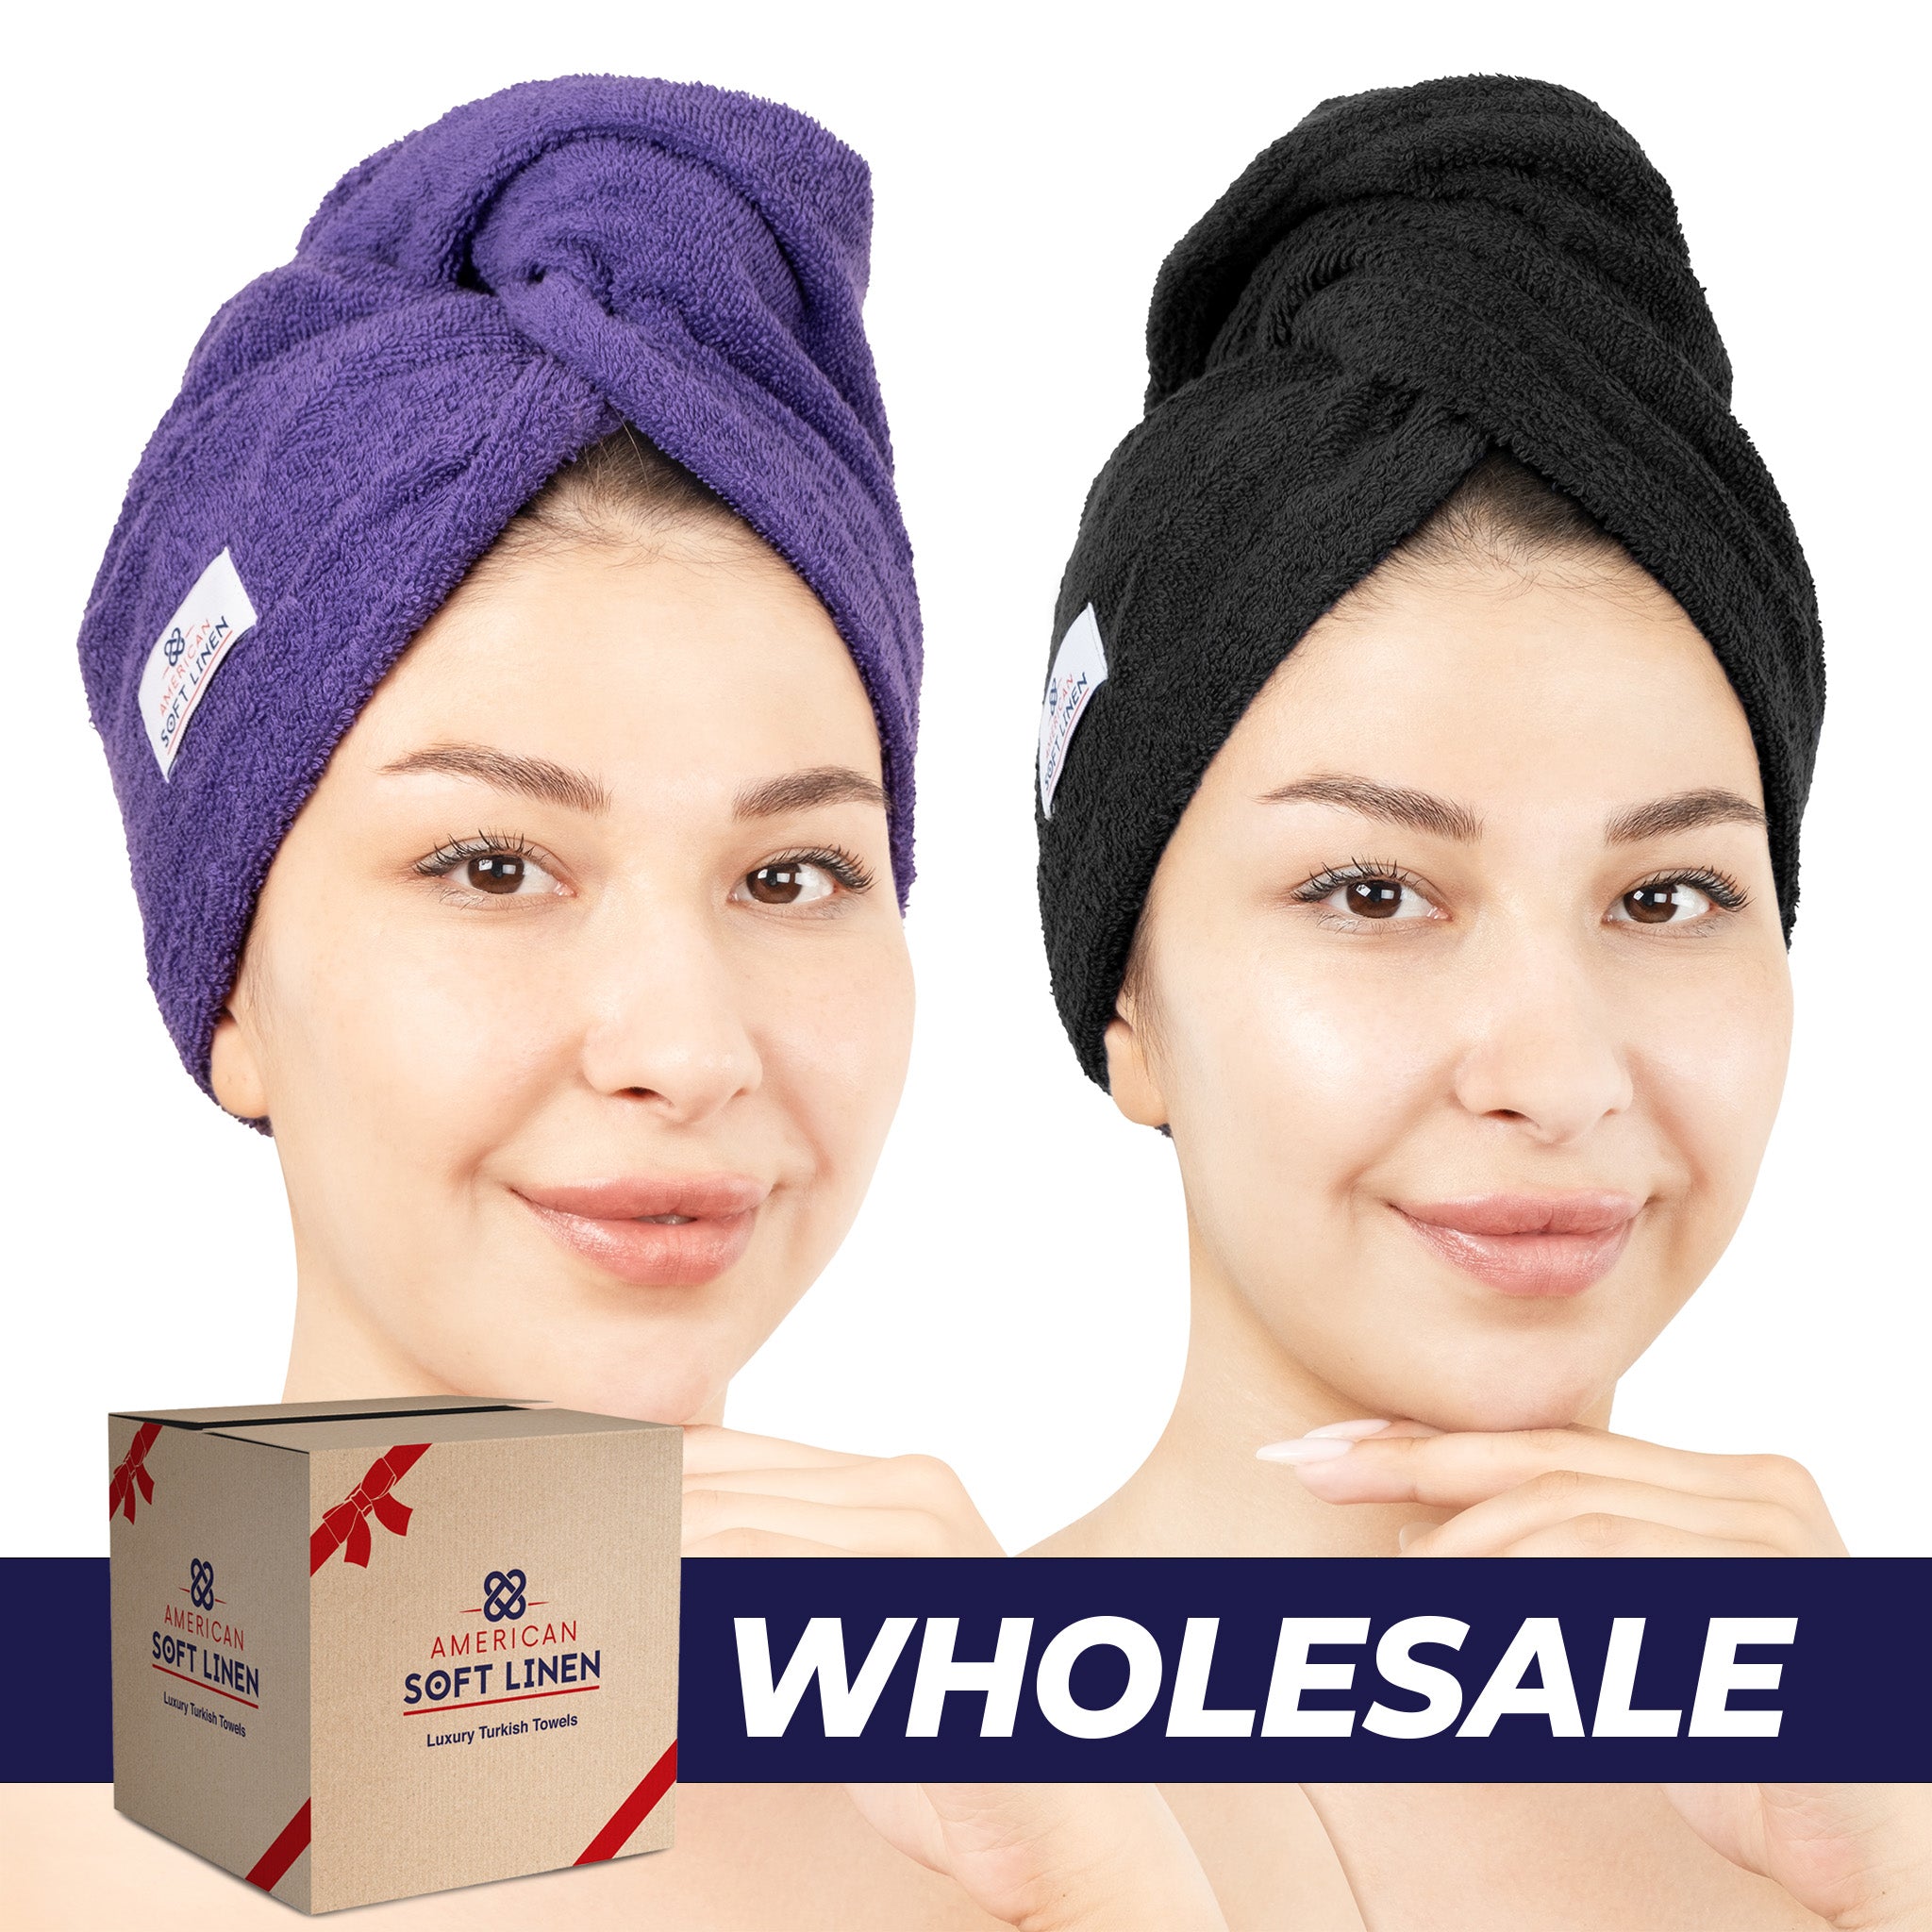 American Soft Linen 100% Cotton Hair Drying Towels for Women 2 pack 75 set case pack purple-black-0